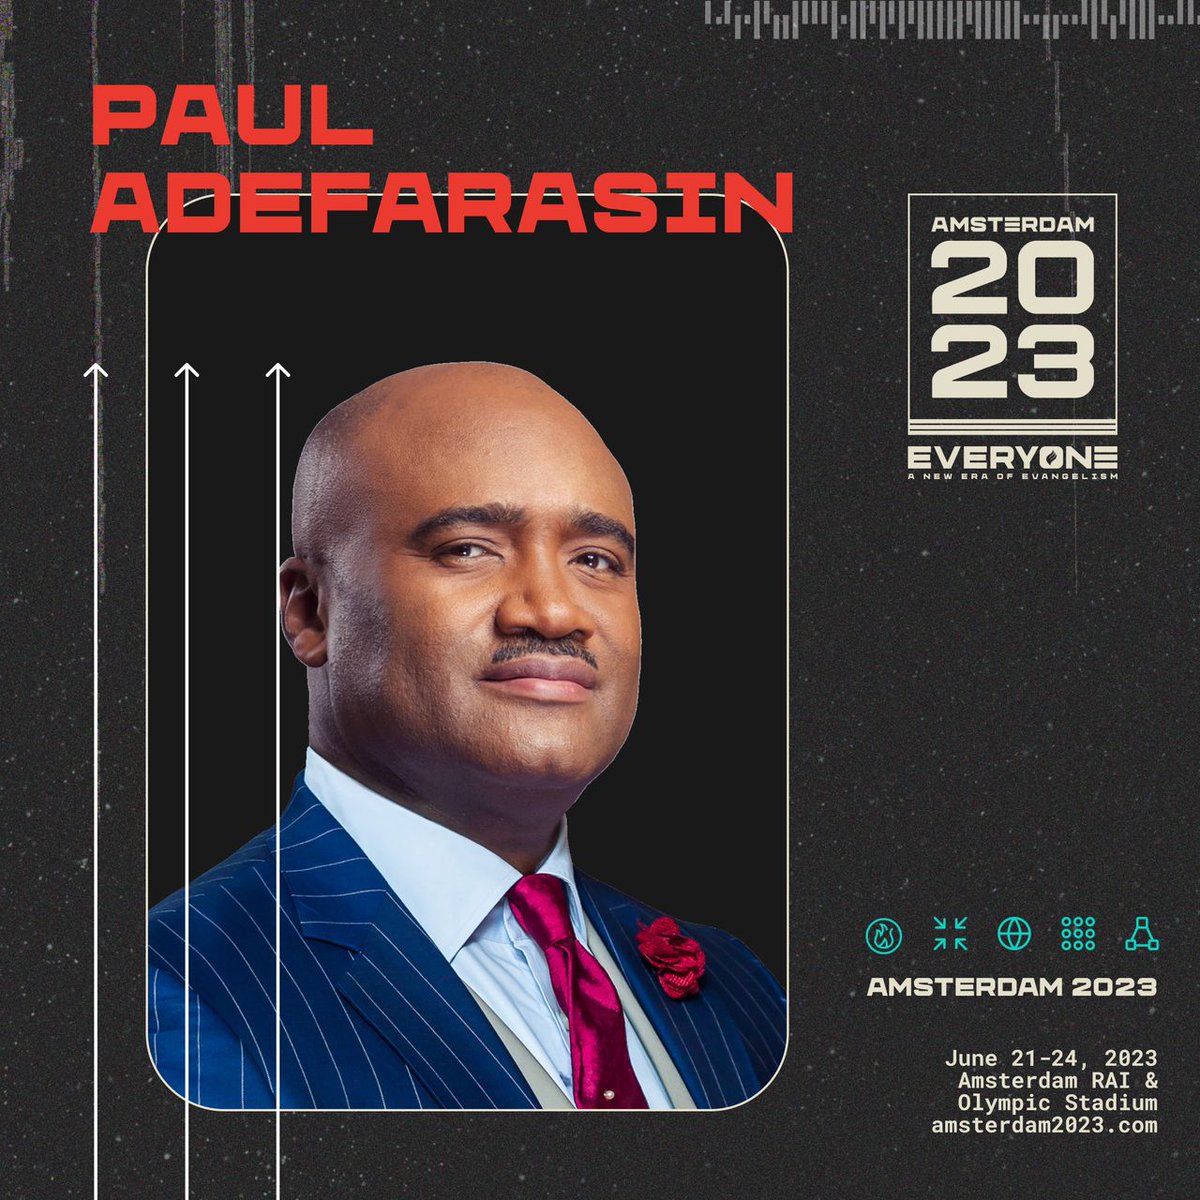 We are excited to invite you to join Pastor Paul’s session at Amsterdam 2023 online.
Date: Today, Thursday, June 22nd at 7pm which is 6pm  West African Time.

Register online at amsterdam2023.com

#EmpoweringEvent #SpreadTheGospel #JoinUs #Amsterdam23 #GlobalOutreach